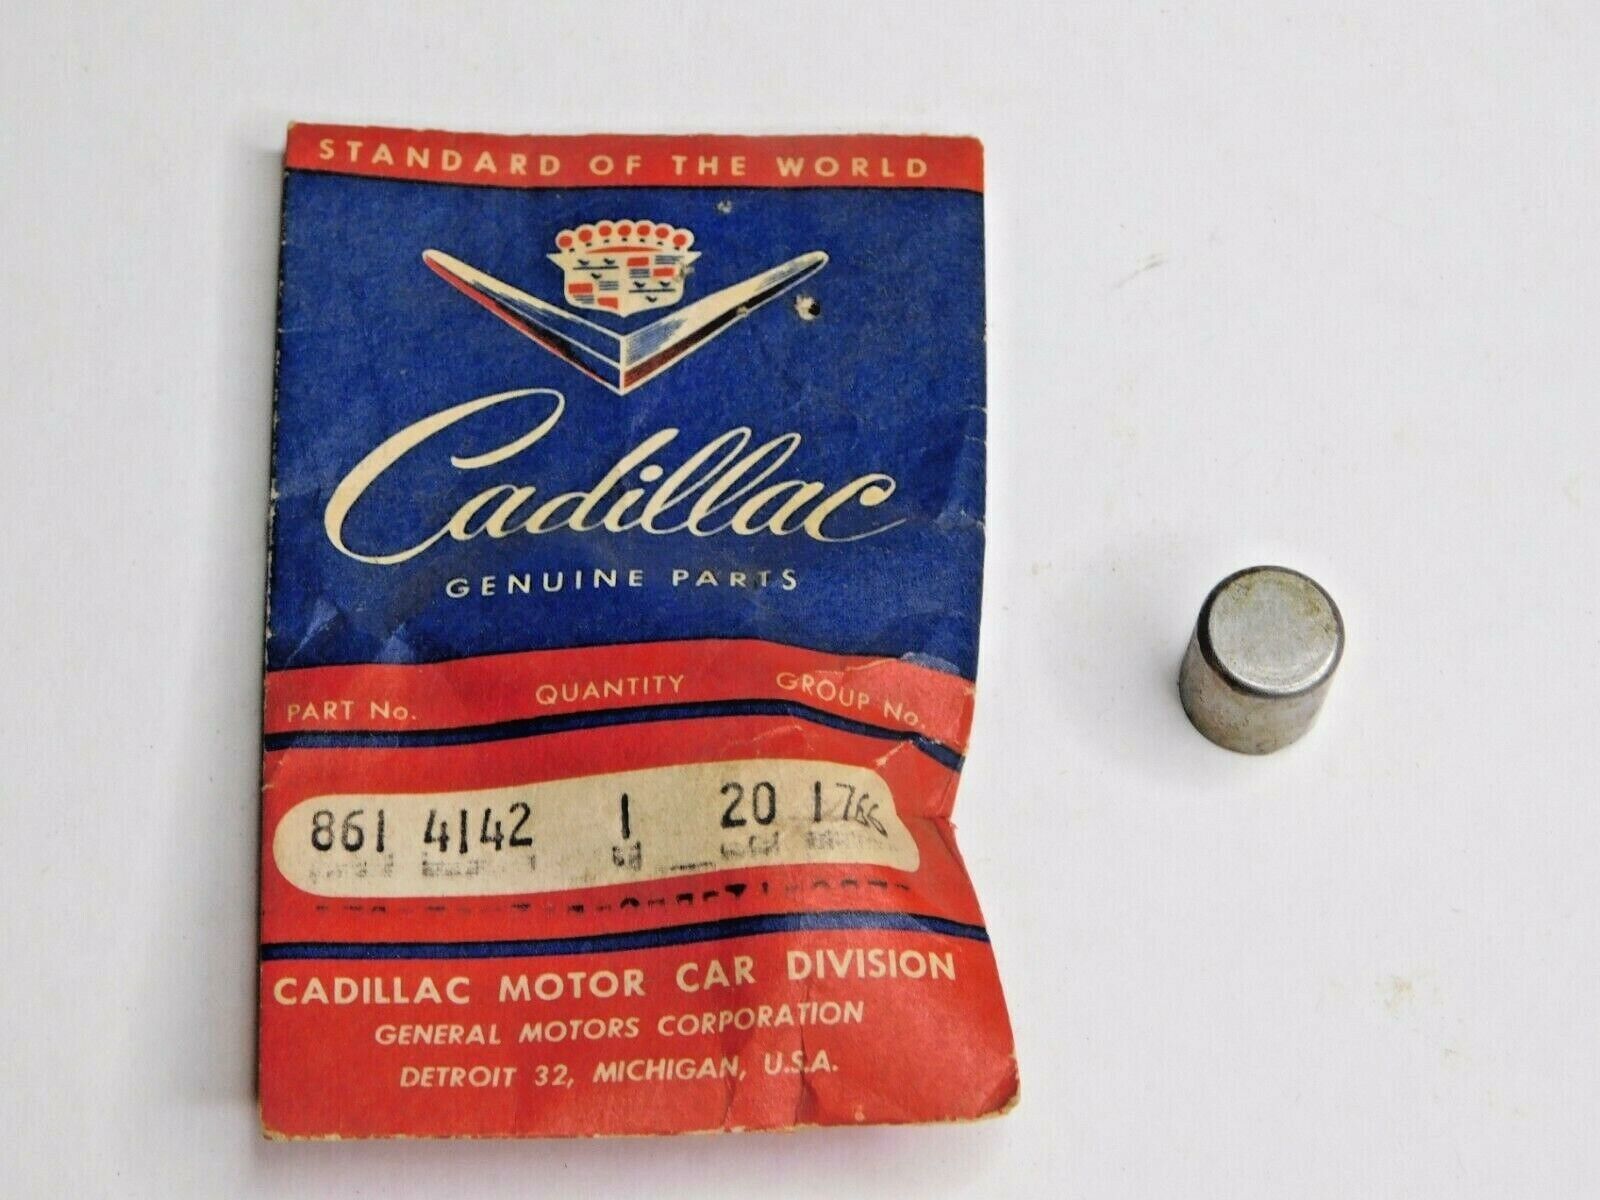 NOS Limited time trial price Original Cadillac Genuine Parts Silver Steel 20.1766 8614142 Ranking TOP20